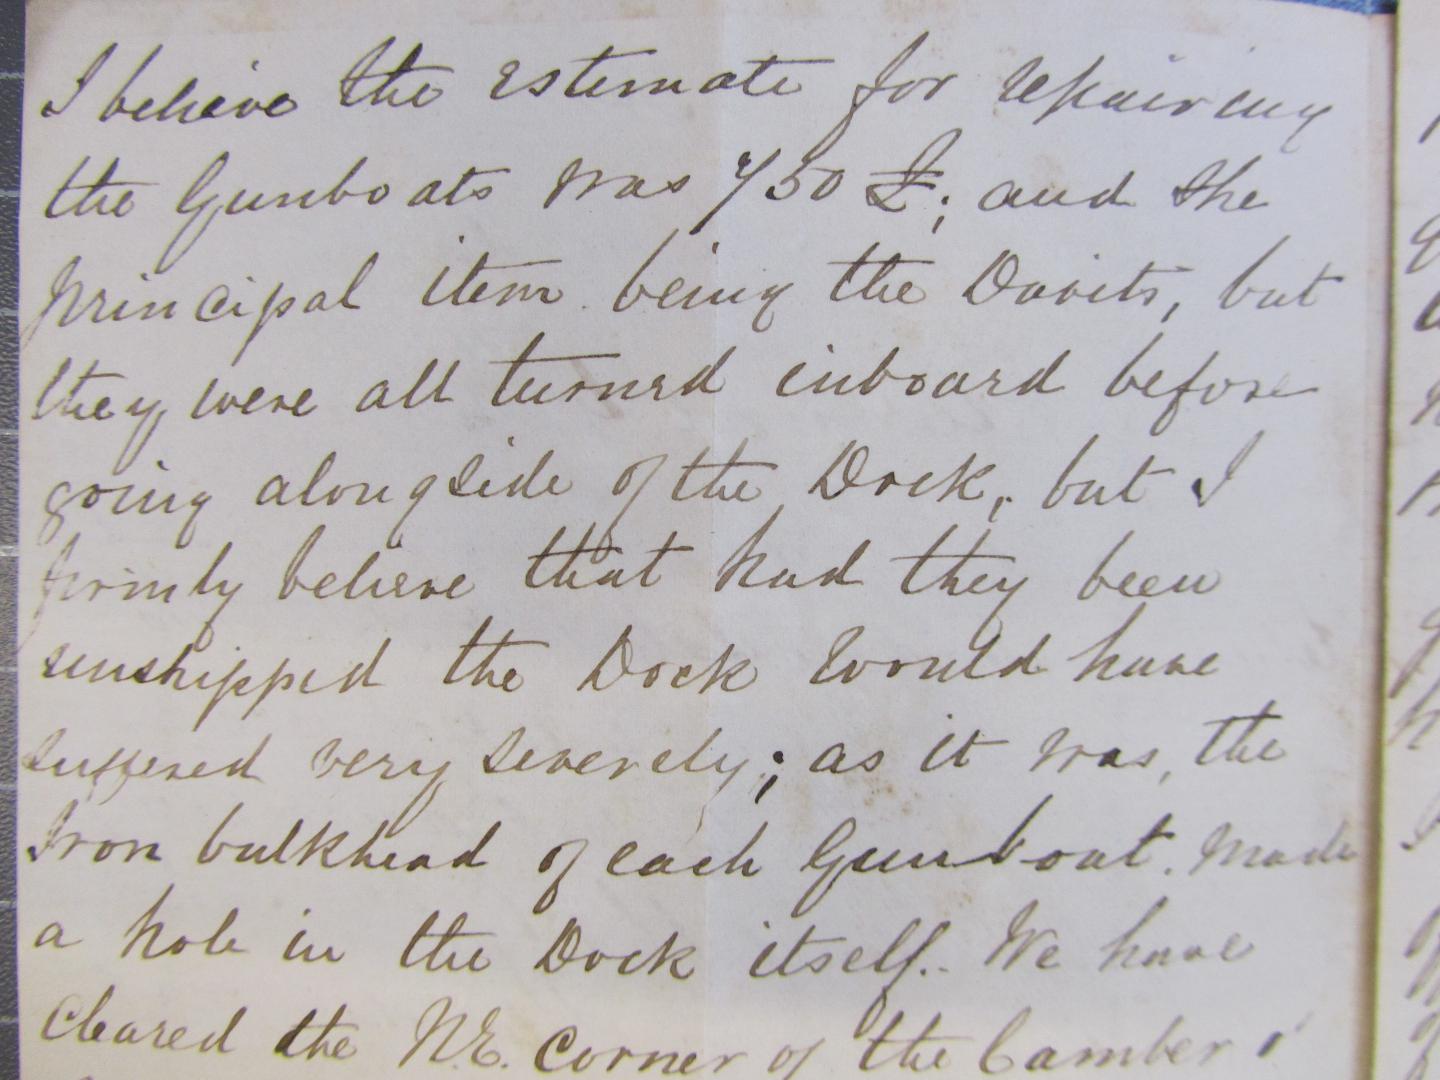 Part of a letter from Ross to Wainwright, discussing damage done to the Vixen when she went alongside the dock